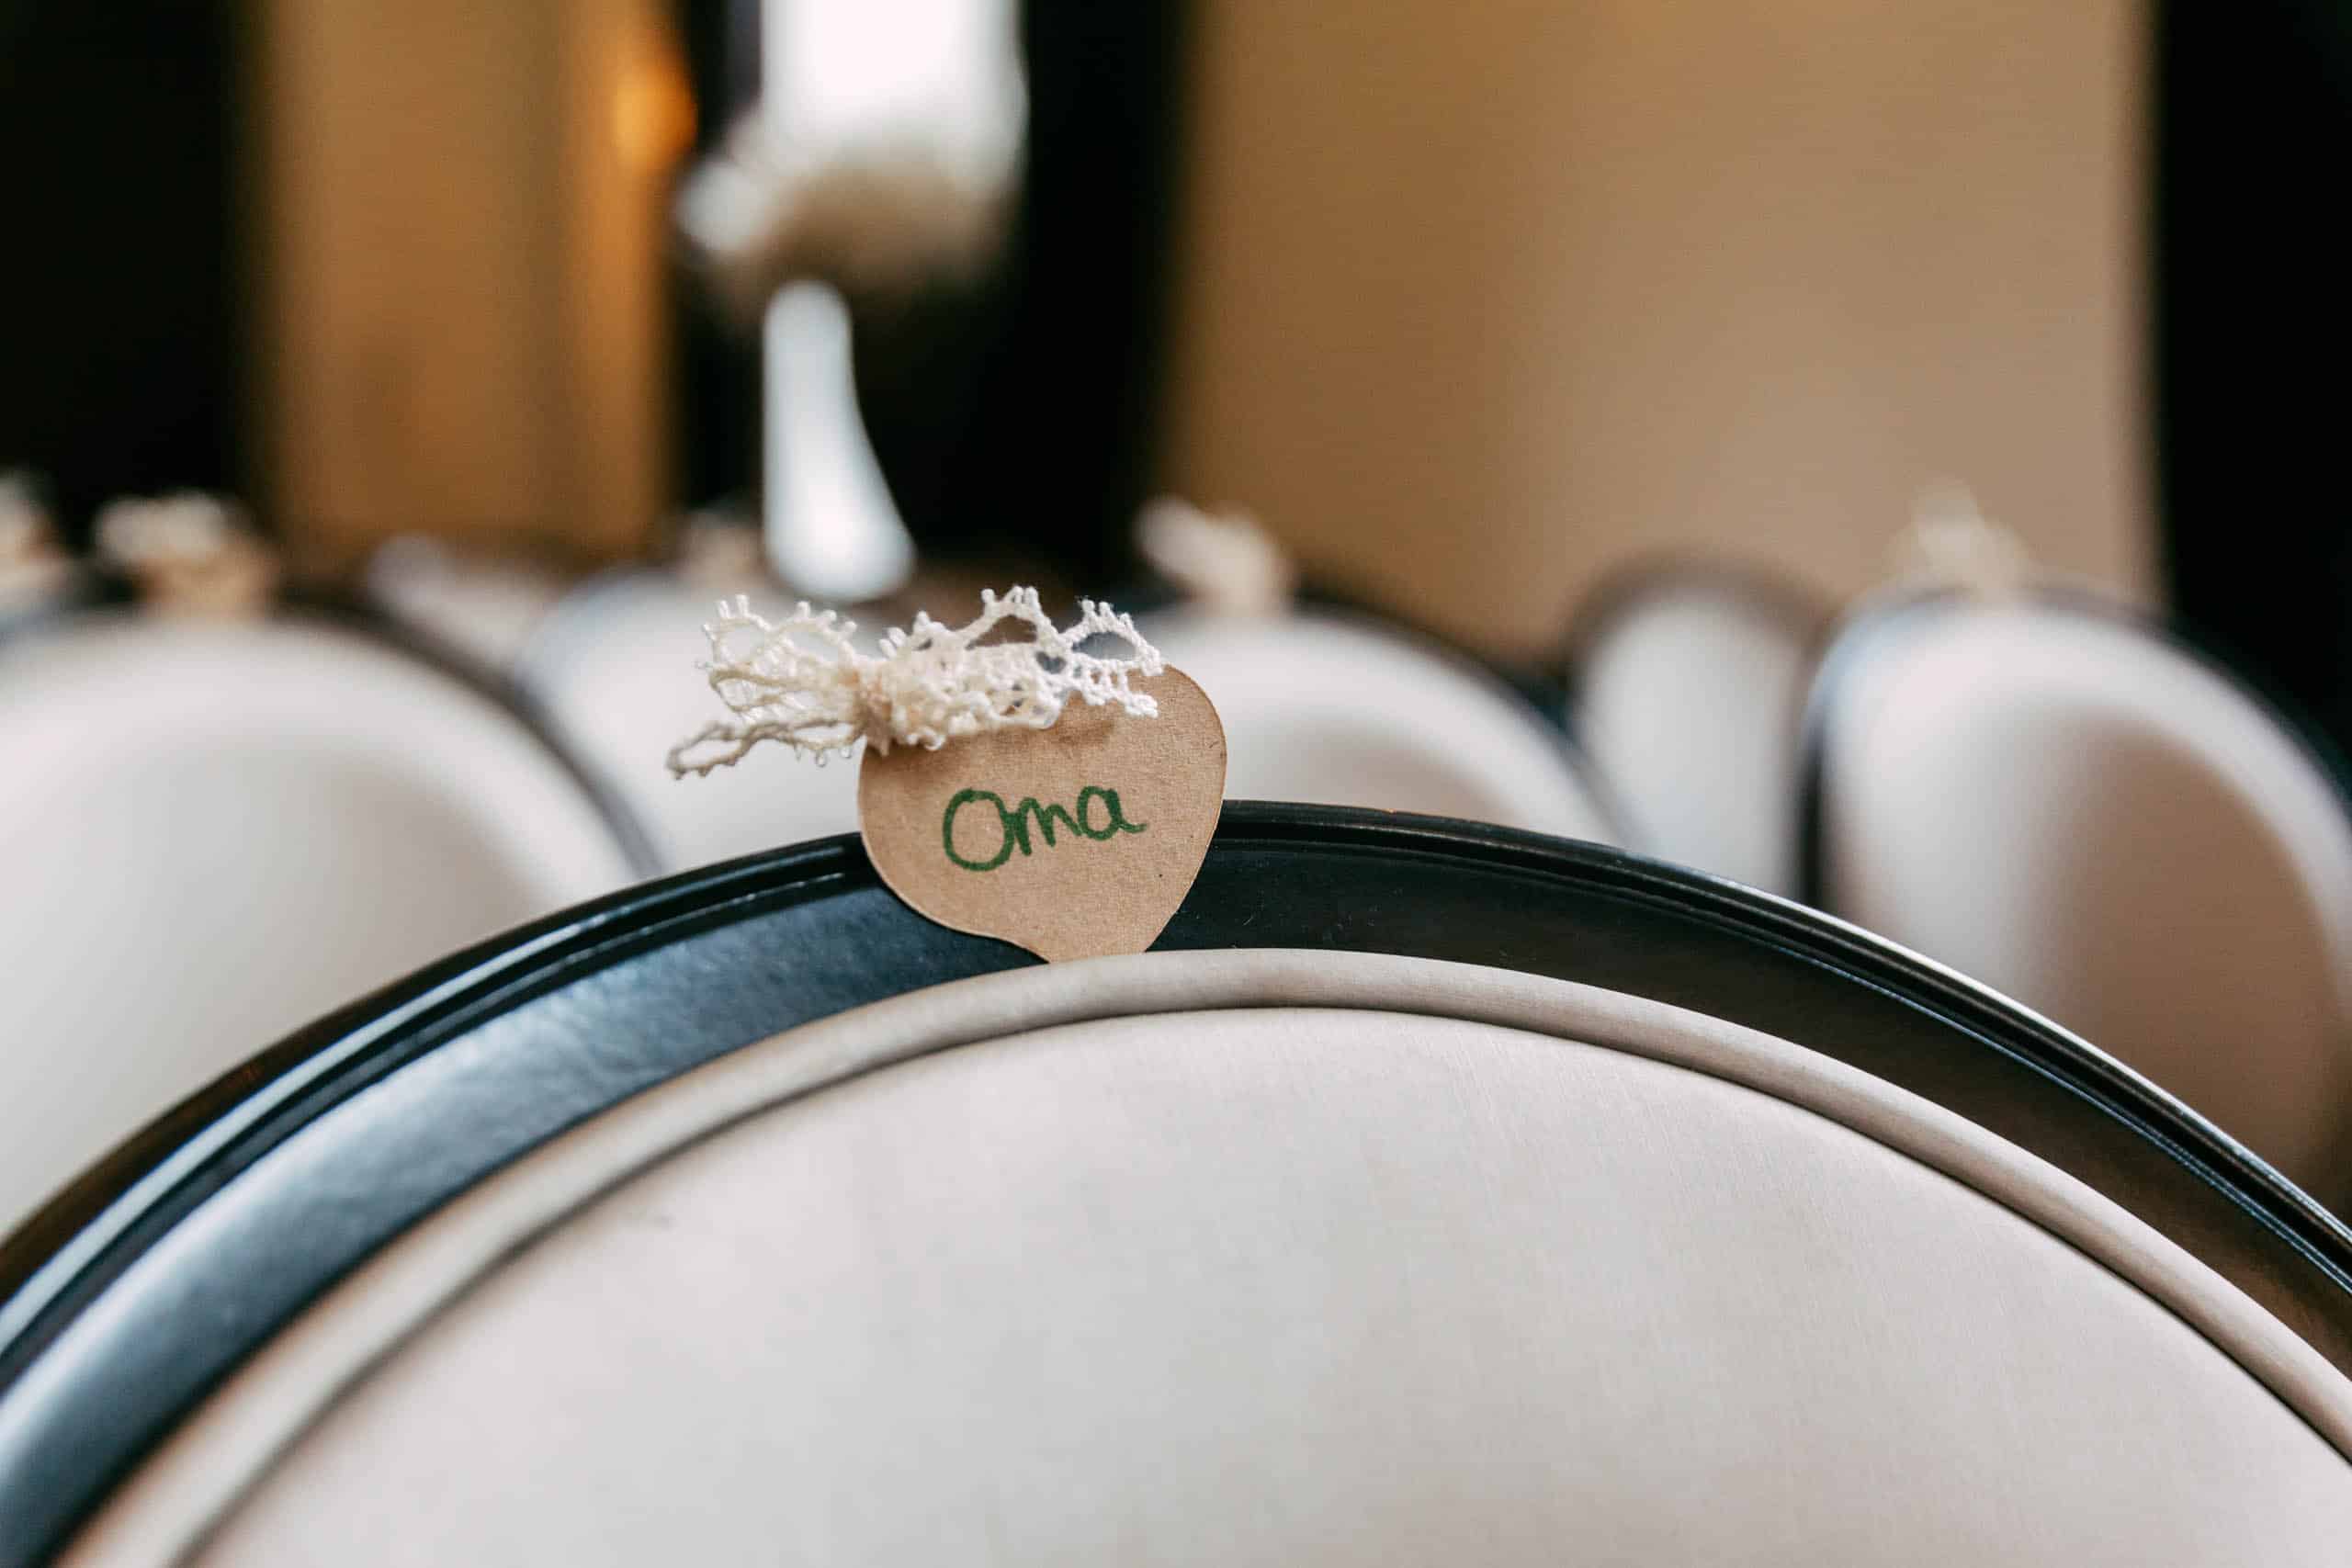 Wedding chairs with names on them, personalised at wedding invitation.